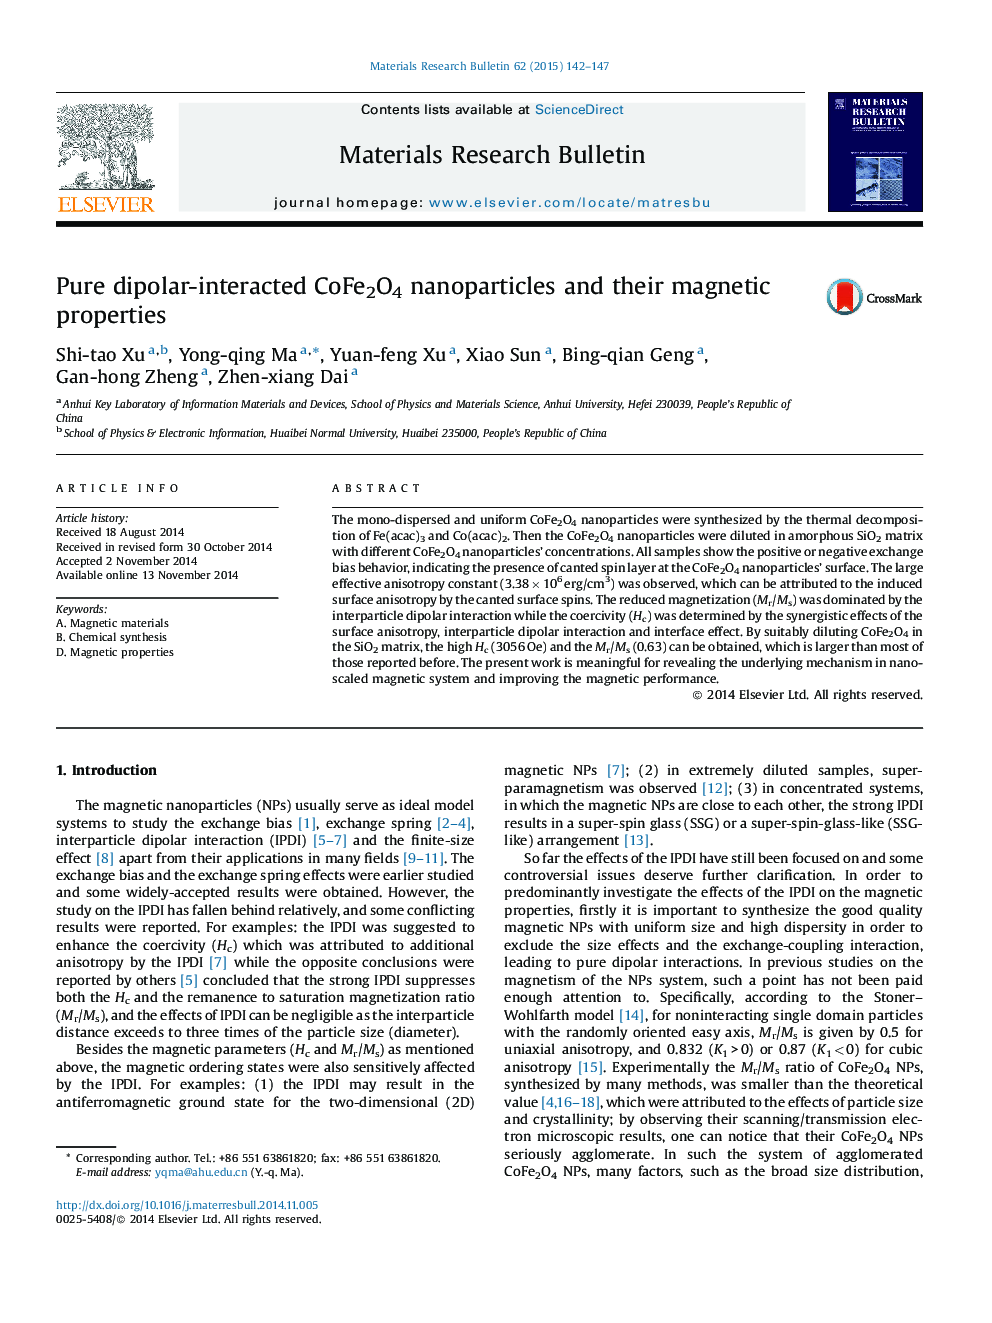 Pure dipolar-interacted CoFe2O4 nanoparticles and their magnetic properties